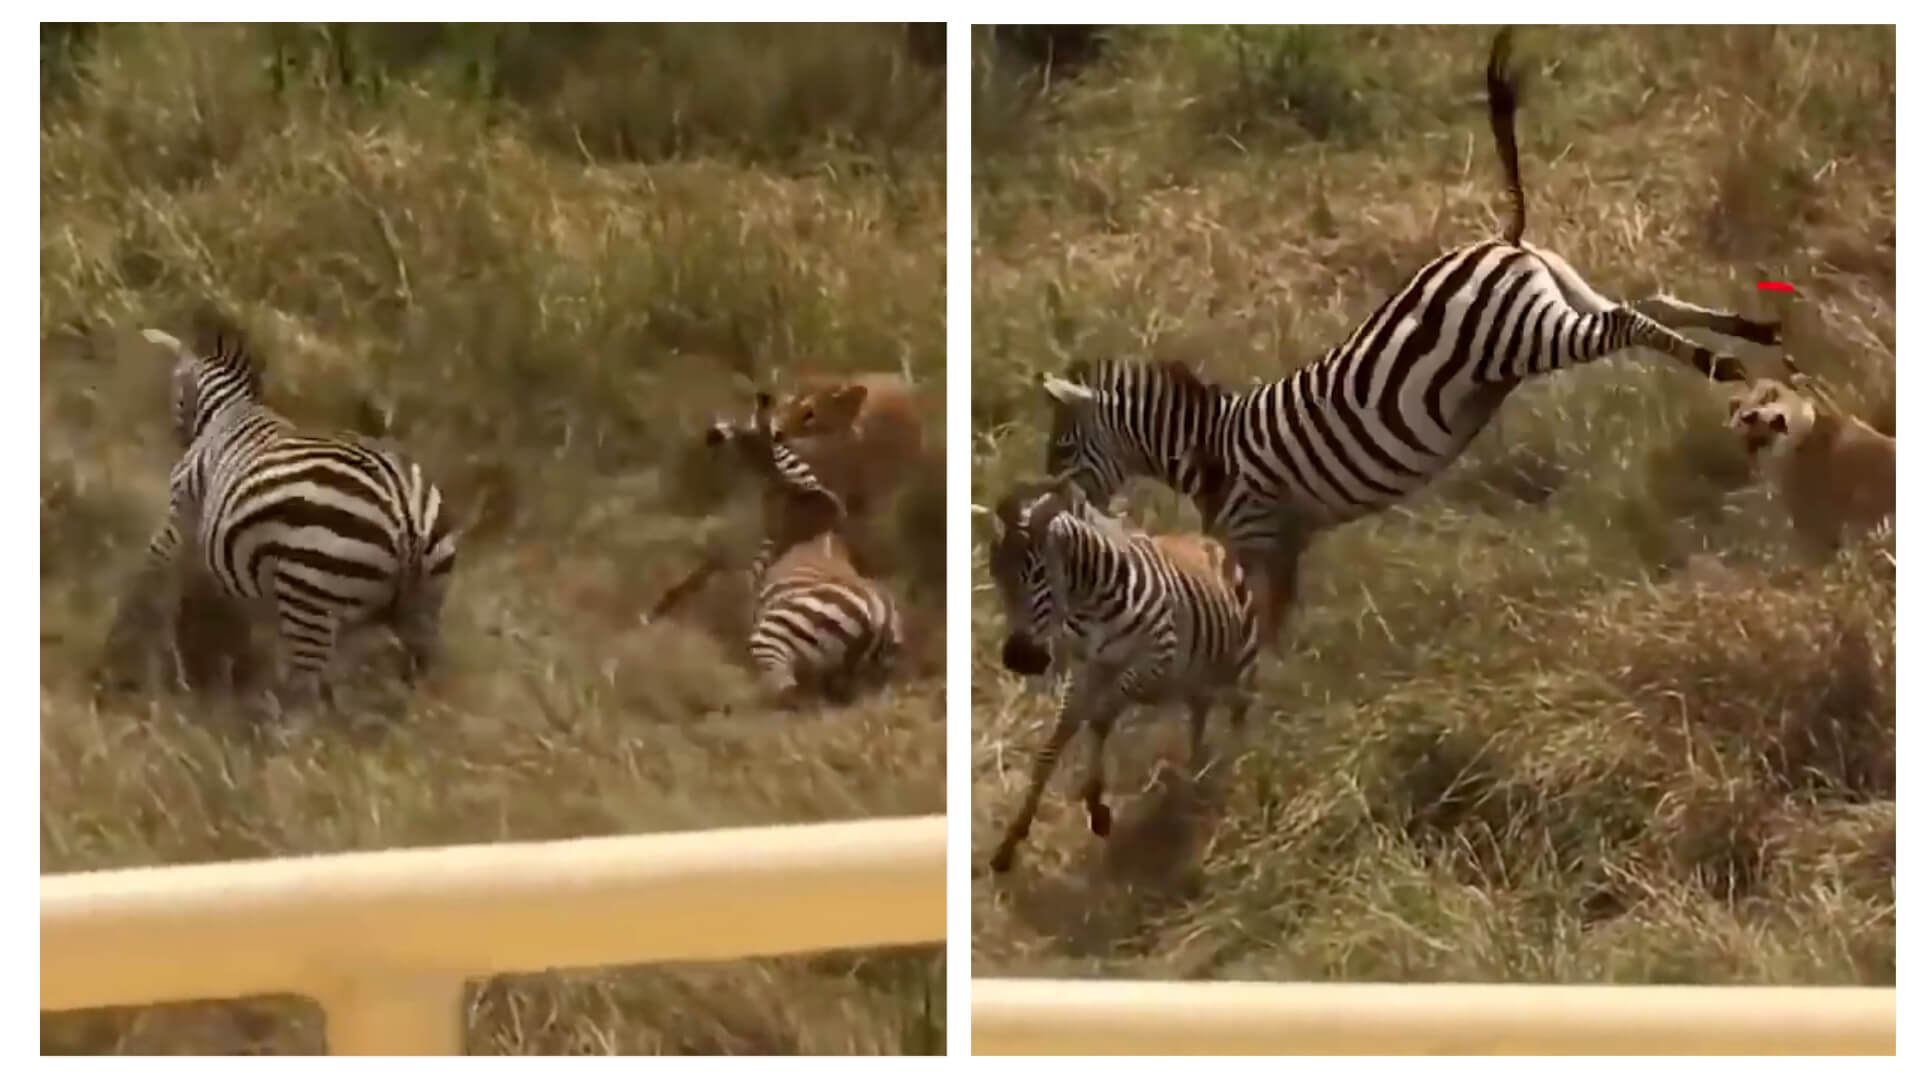 Watch: Courageous Zebra Delivers Powerful Kick To Lion To Save Her Friend From Death